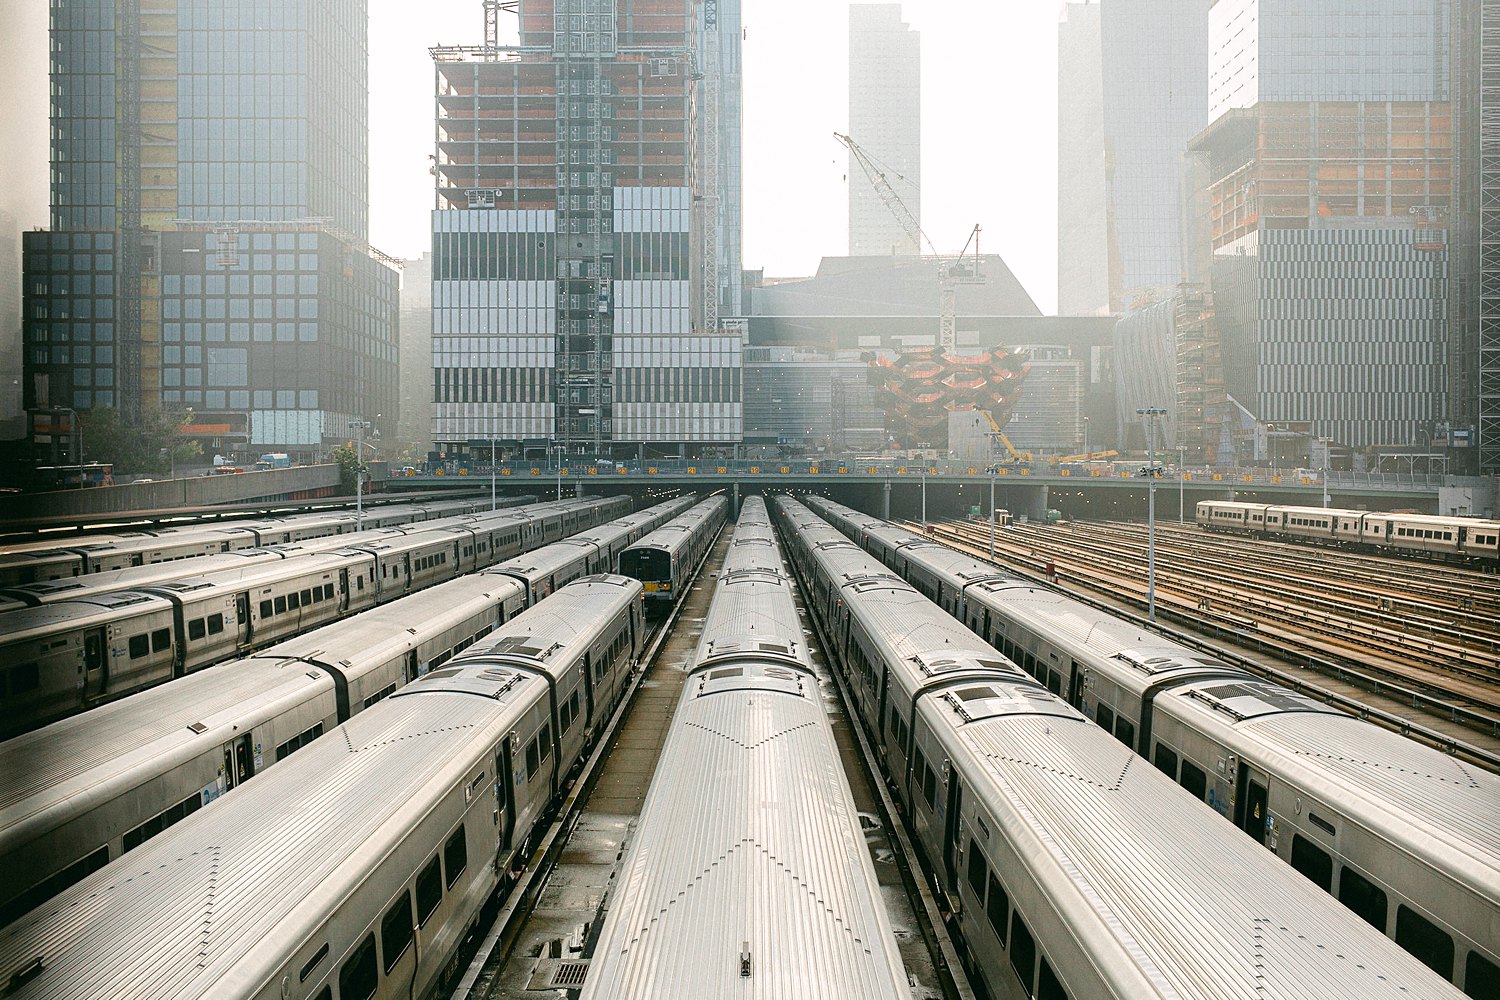 Hudson yards trains against skyline Manhattan NYC places to visit in New York